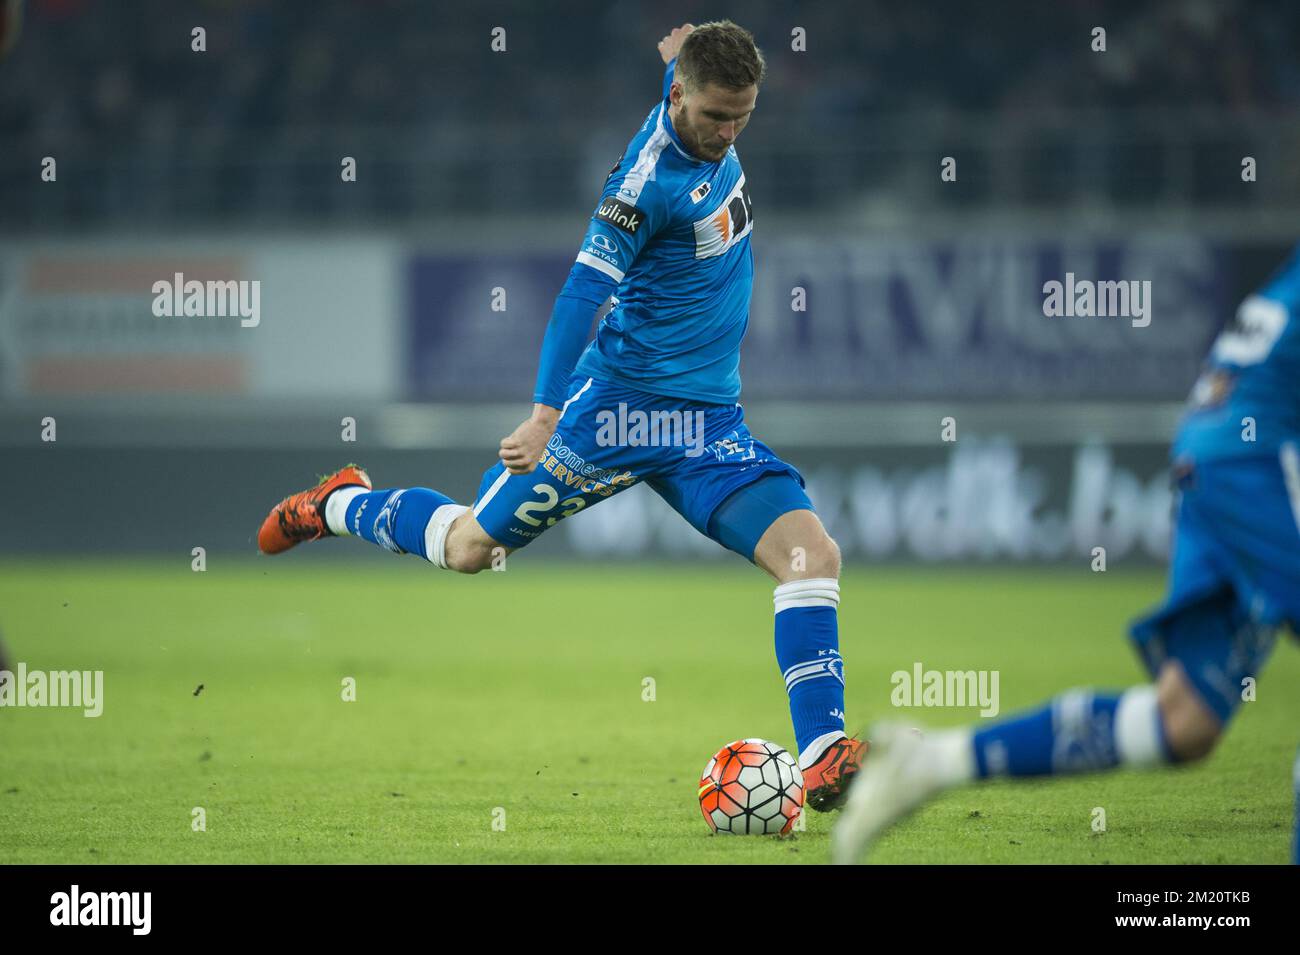 20160121 - GENT, BELGIUM: Gent's Lasse Nielsen pictured in action during  the Croky Cup first leg 1/